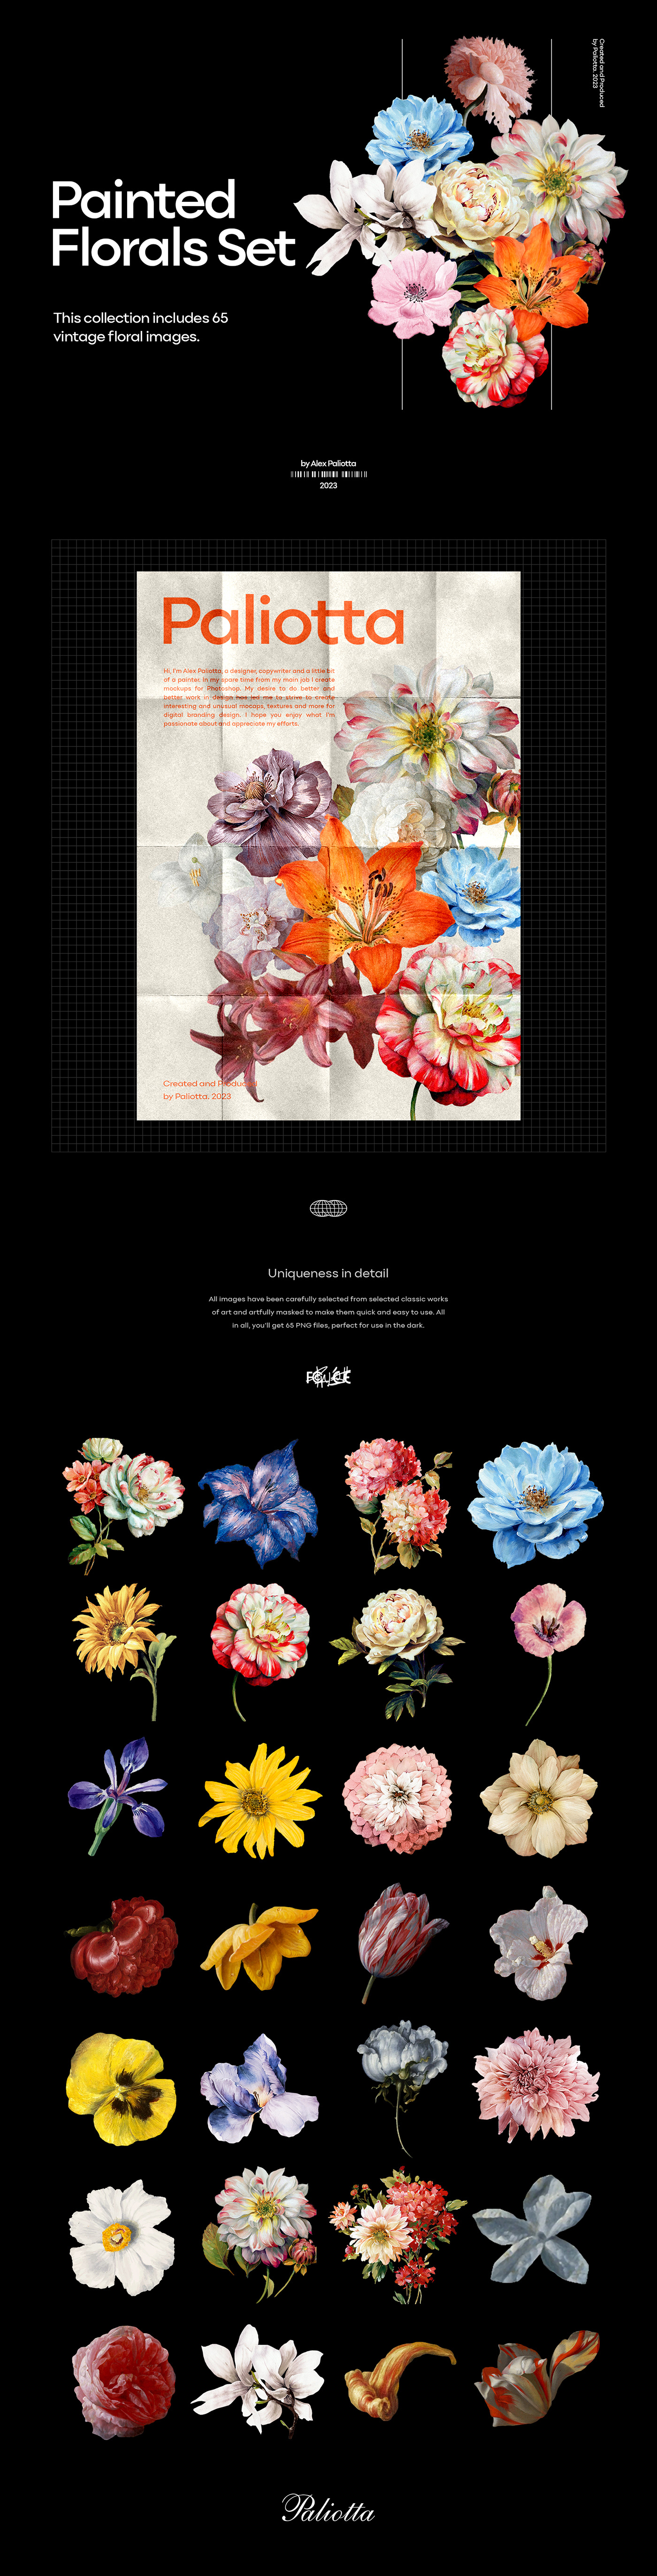 download florals free freebie Mockup painted floral png png download psd